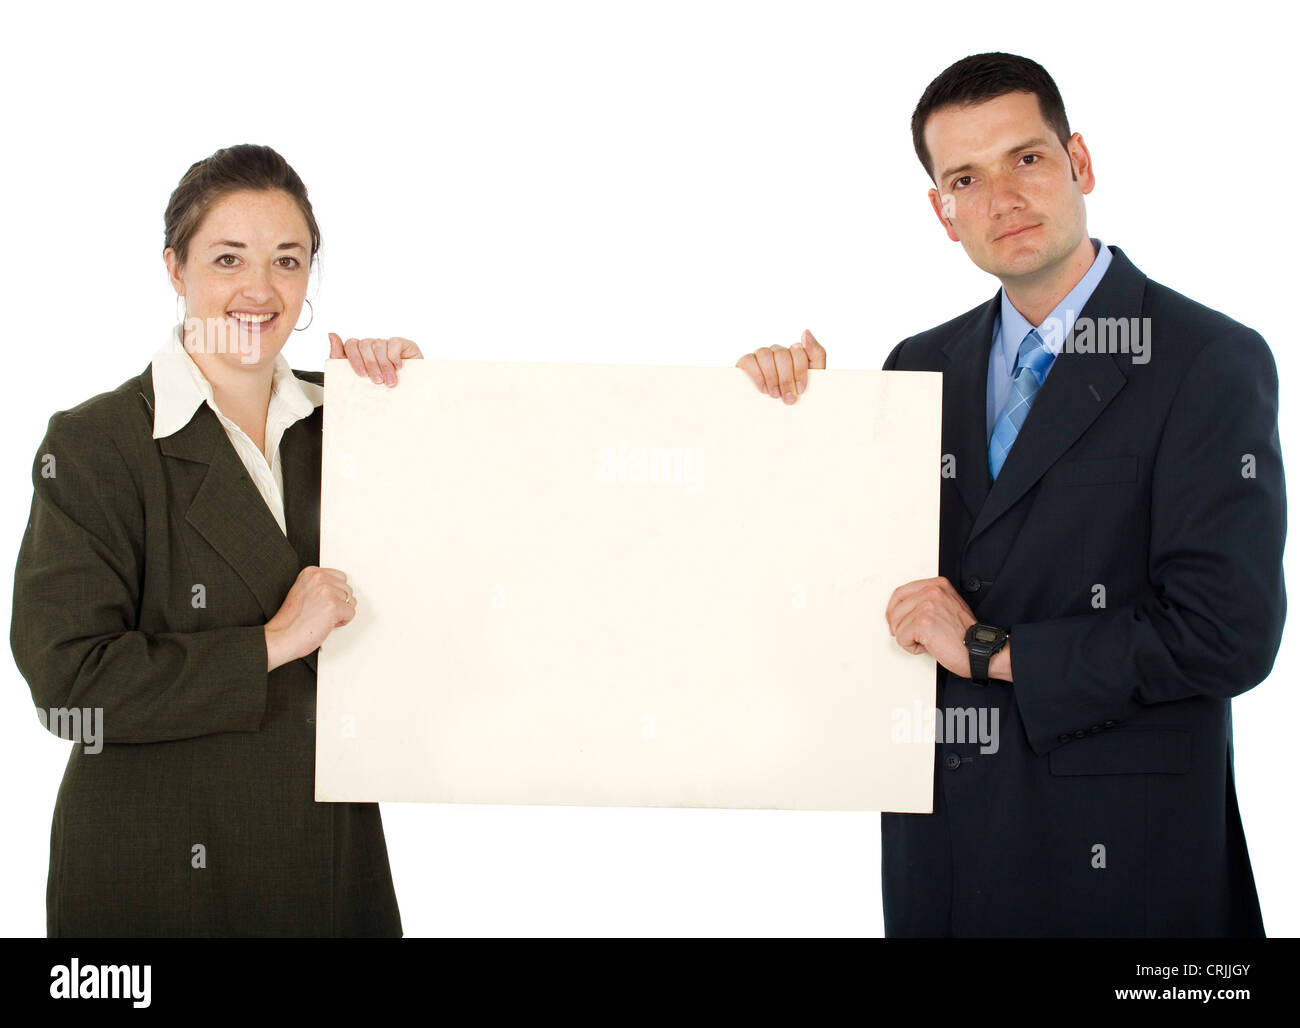 two young business people holding up a sign Stock Photo